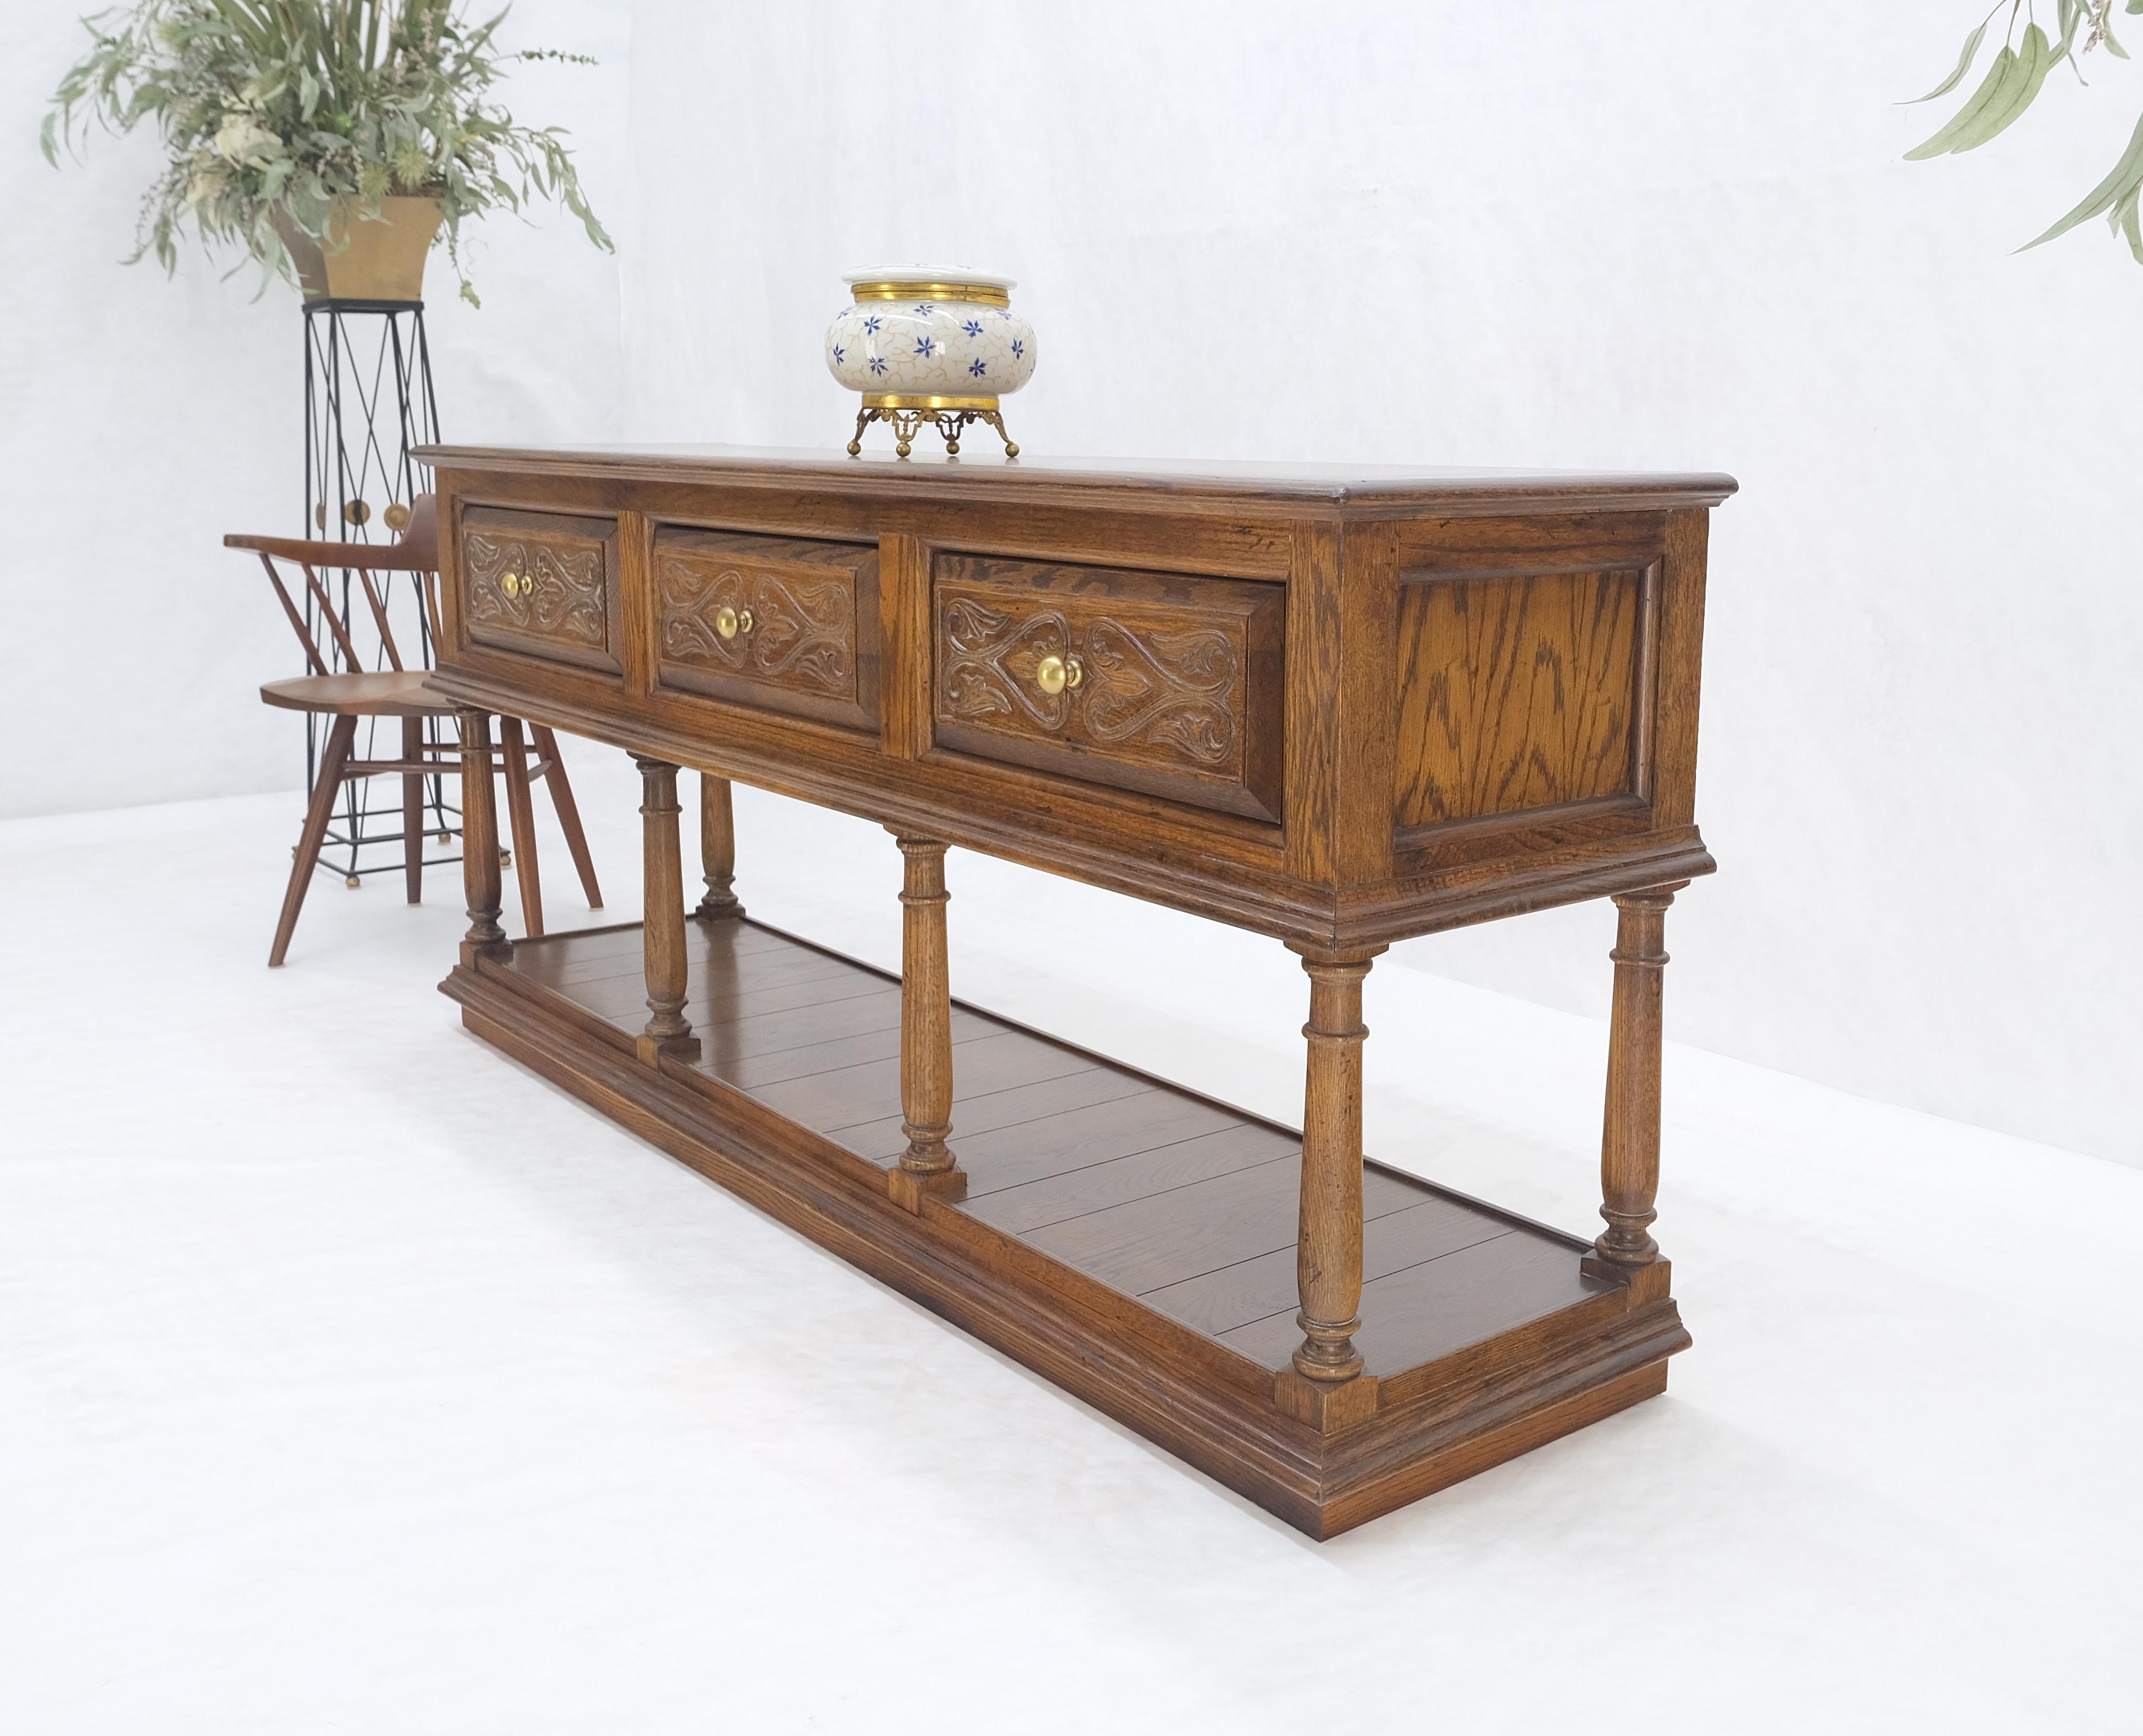 Spanish Colonial Carved Oak 3 Deep Drawer Sideboard Credenza Buffet Console MINT!